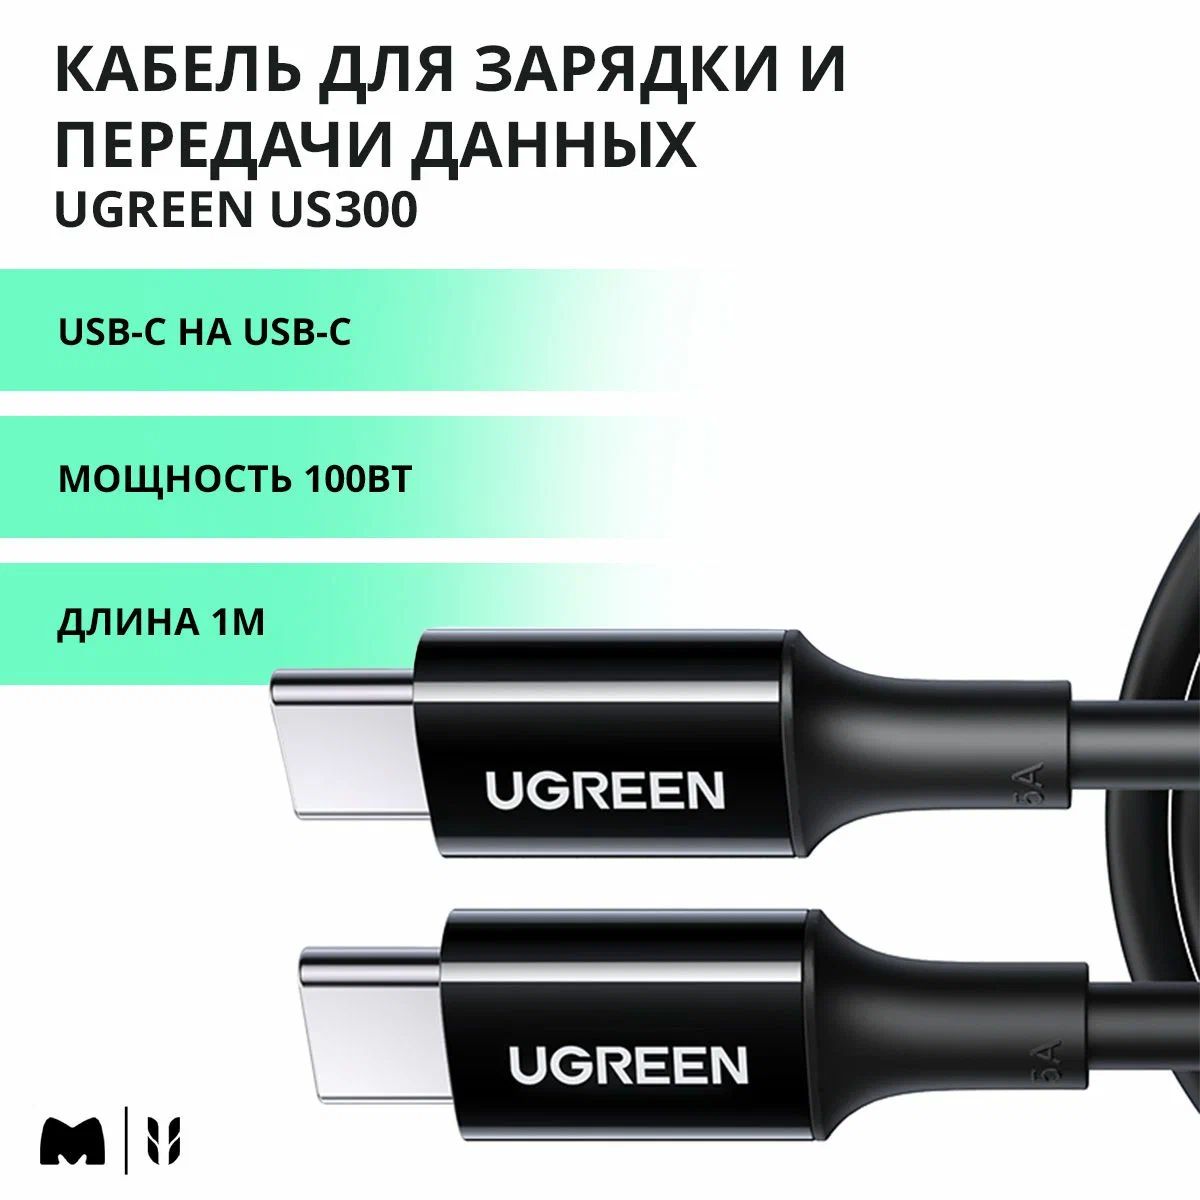 Кабель UGREEN Type-C Male to Type-C Male 2.0 ABS Shell 5A Current, длина 1м, цвет черный (80371) кабель ugreen us334 20583 usb c 2 0 male to angled 90° usb c 2 0 male 5a data cable 3м черный